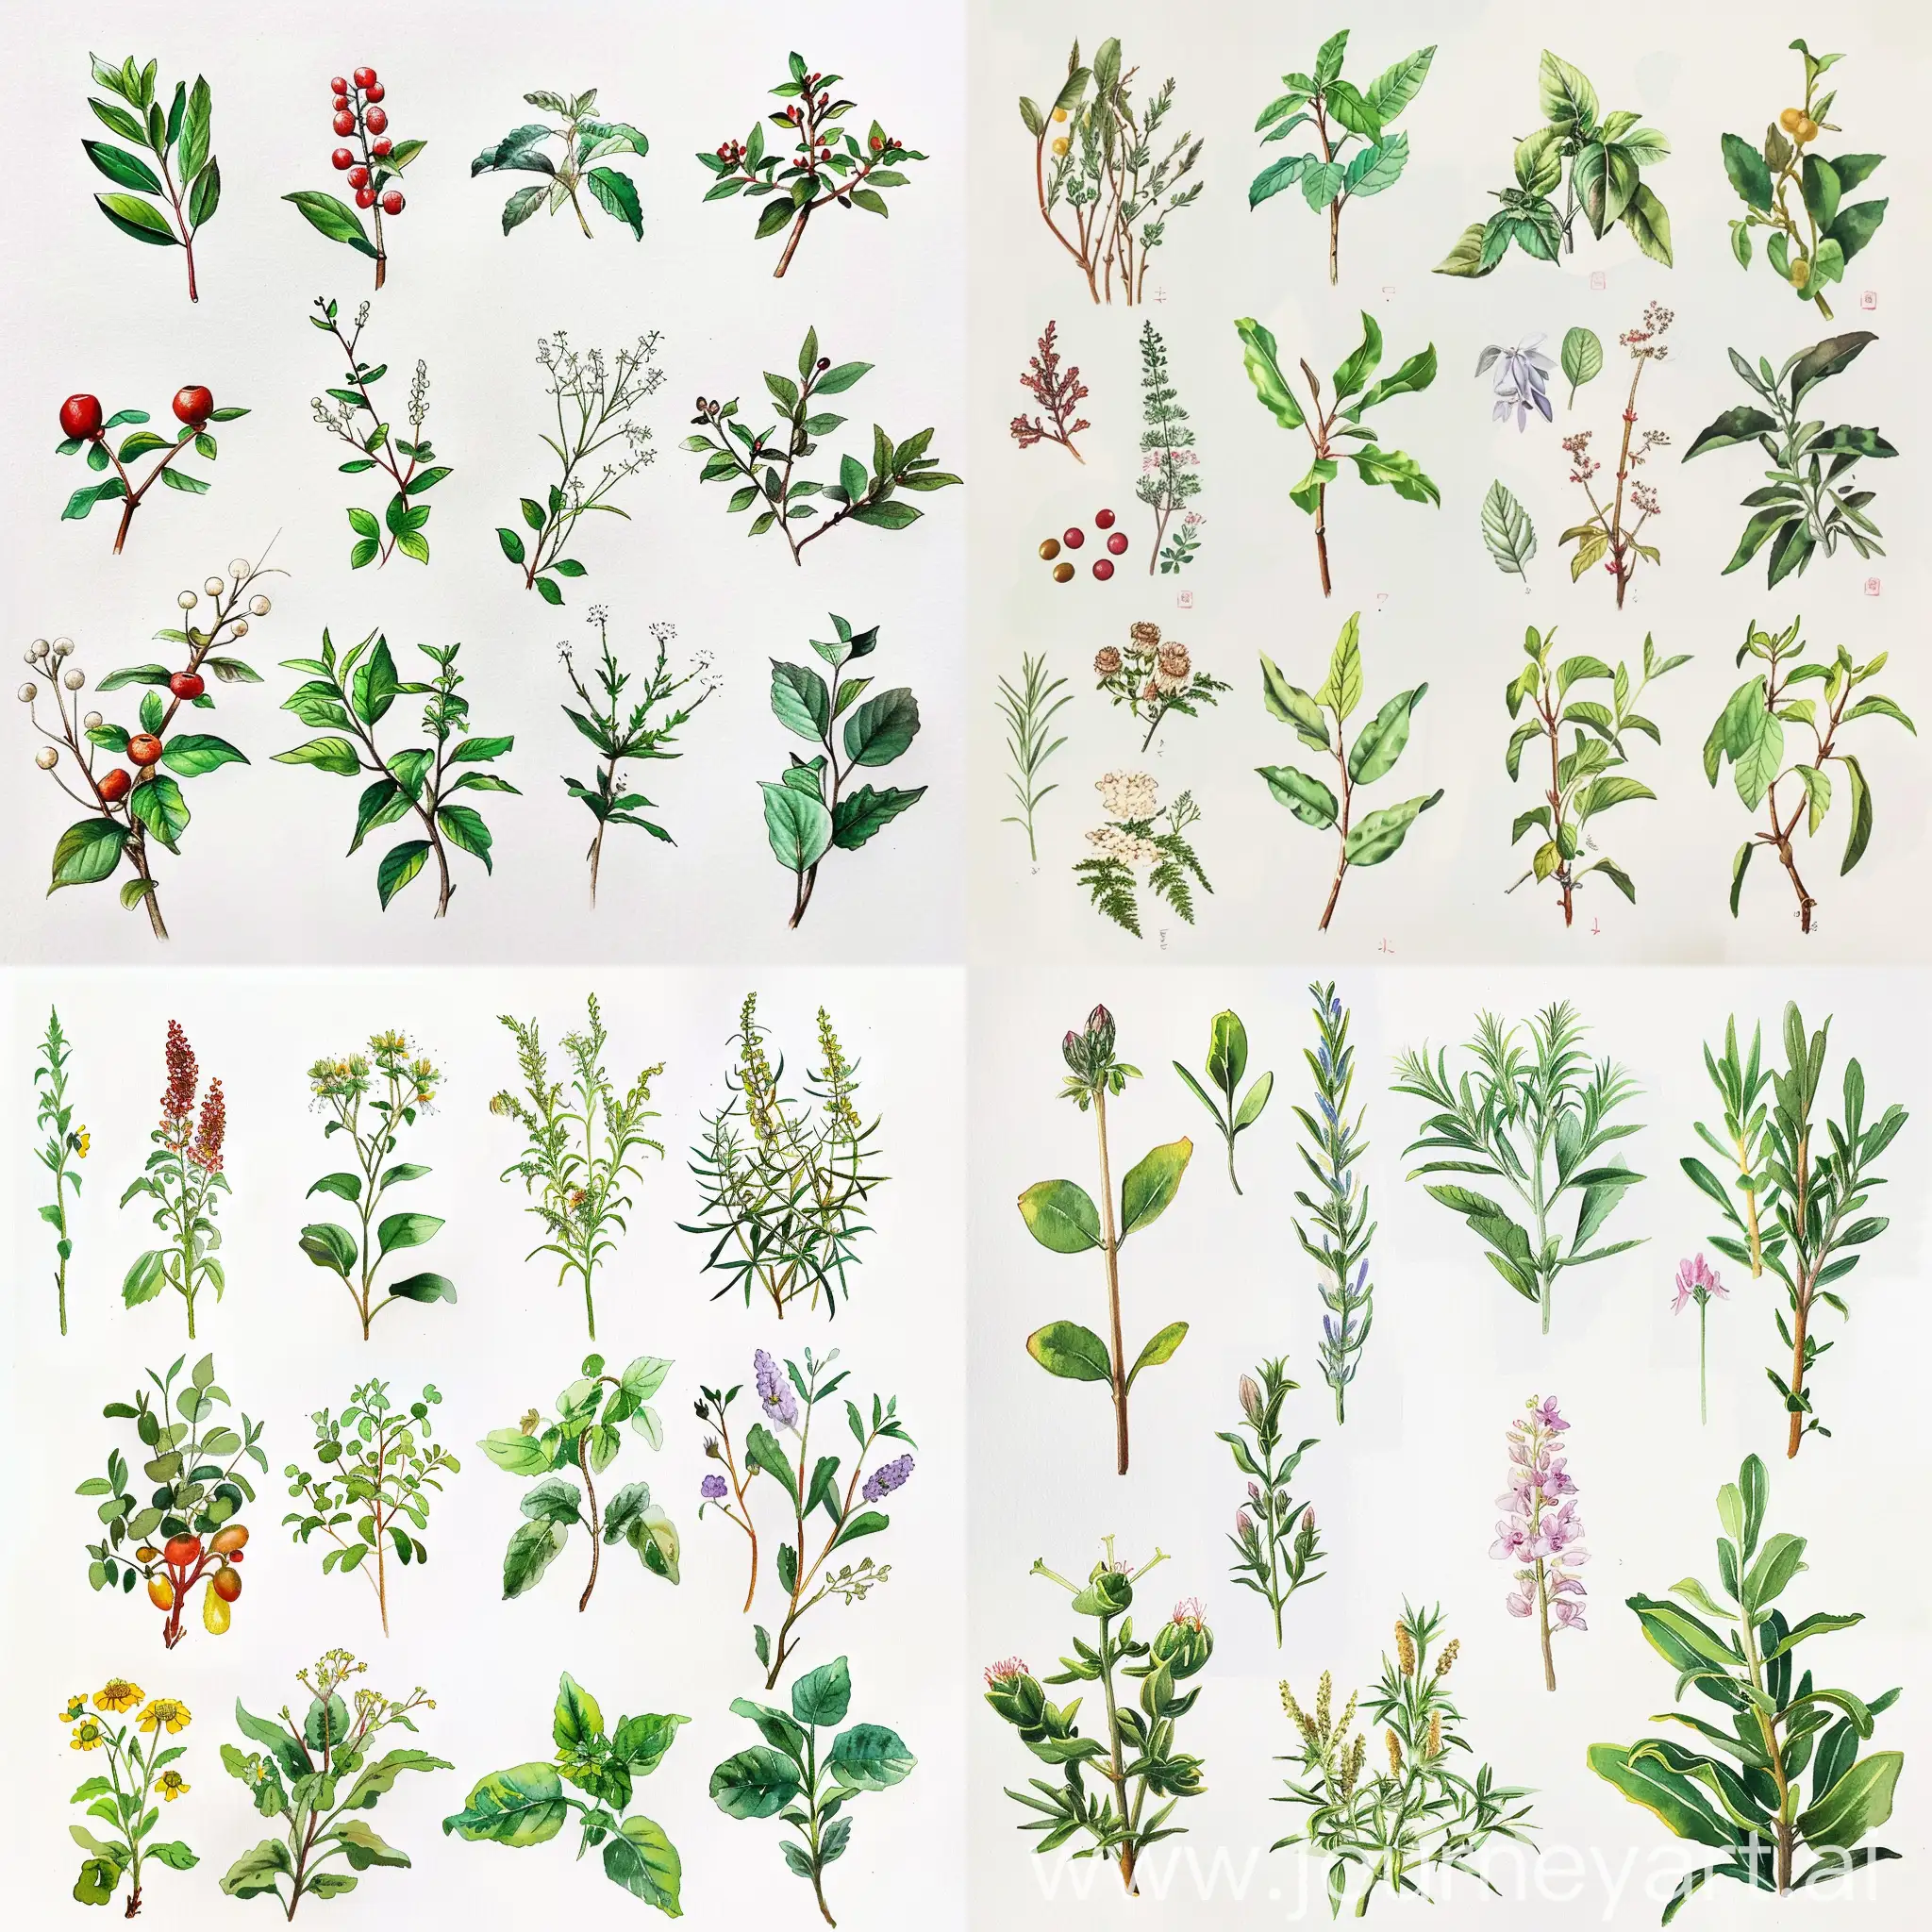 Please draw many different types of original Chinese herbal medicine, plant state, watercolor painting, single plant